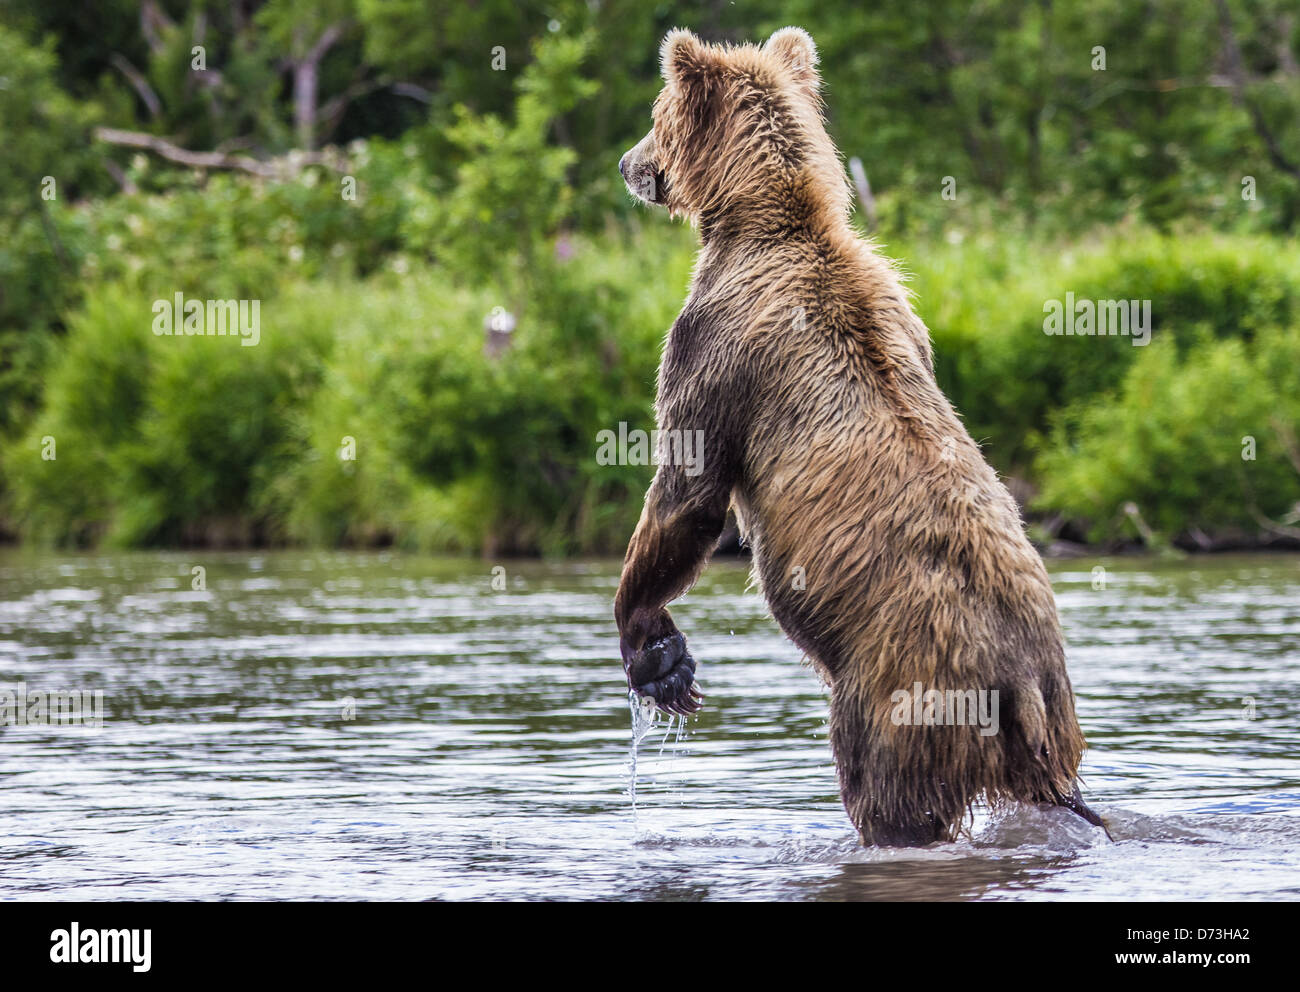 The brown bear fishes Stock Photo